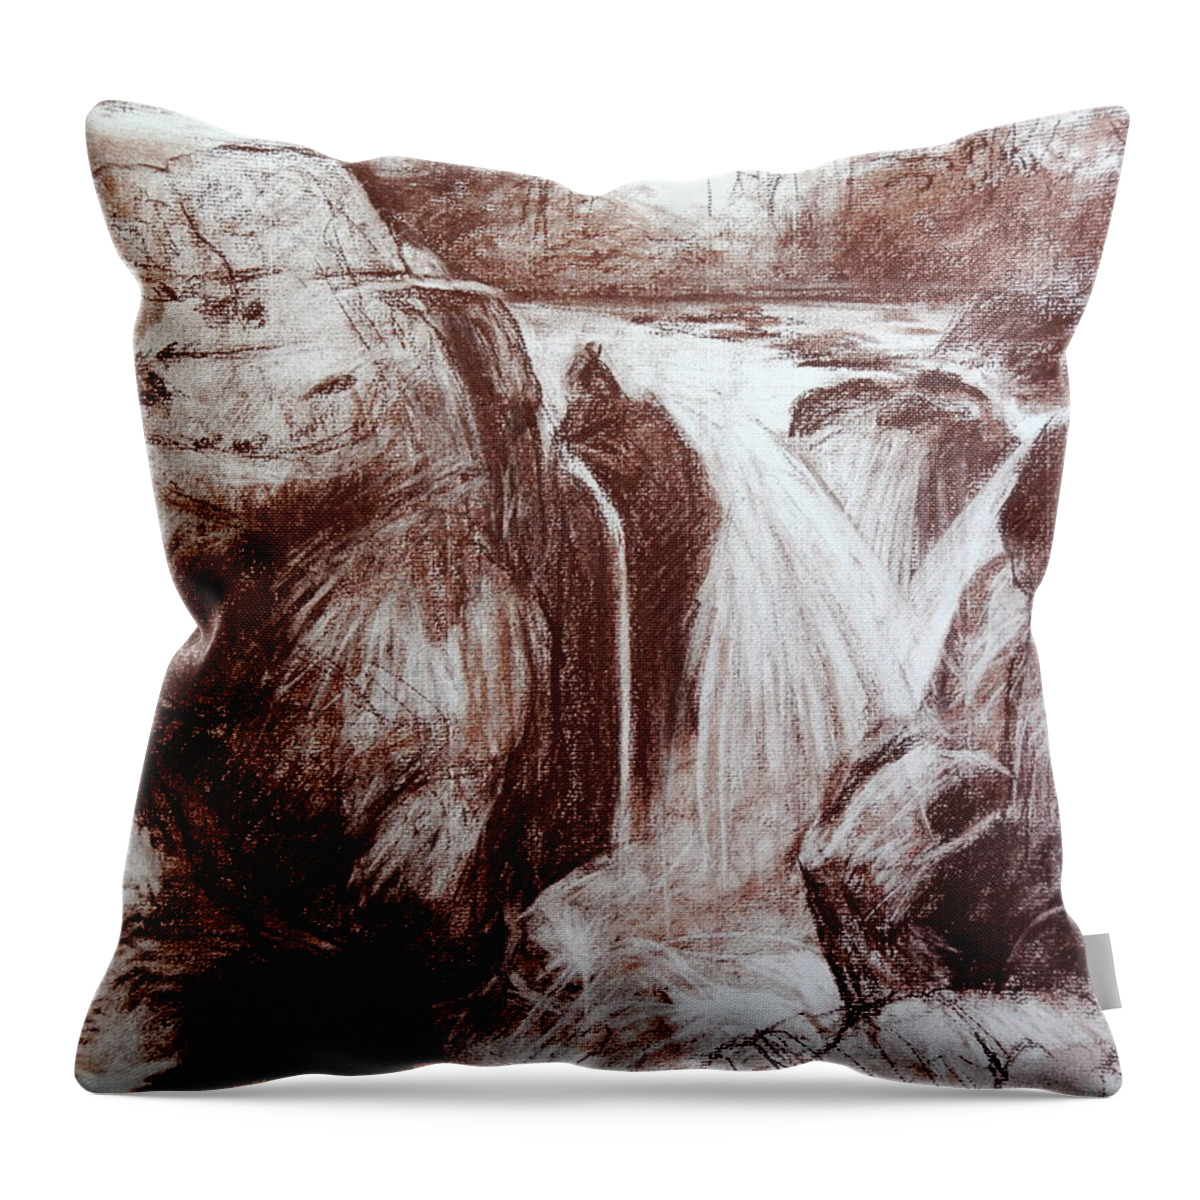 Wales Throw Pillow featuring the drawing Study of Rocks at Betws-y-Coed by Harry Robertson